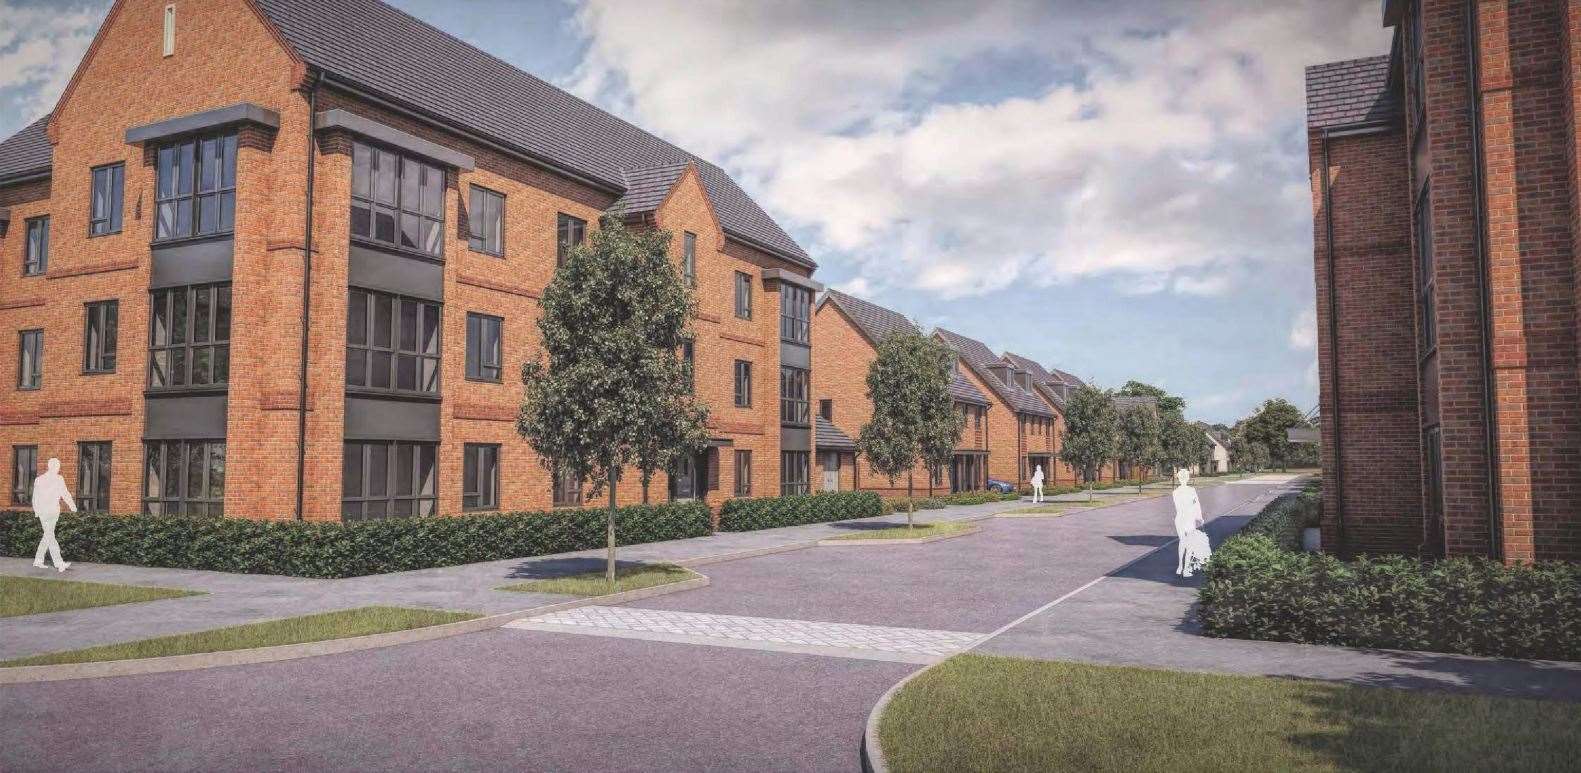 How homes at Napier Barracks could eventually look. Picture: Taylor Wimpey